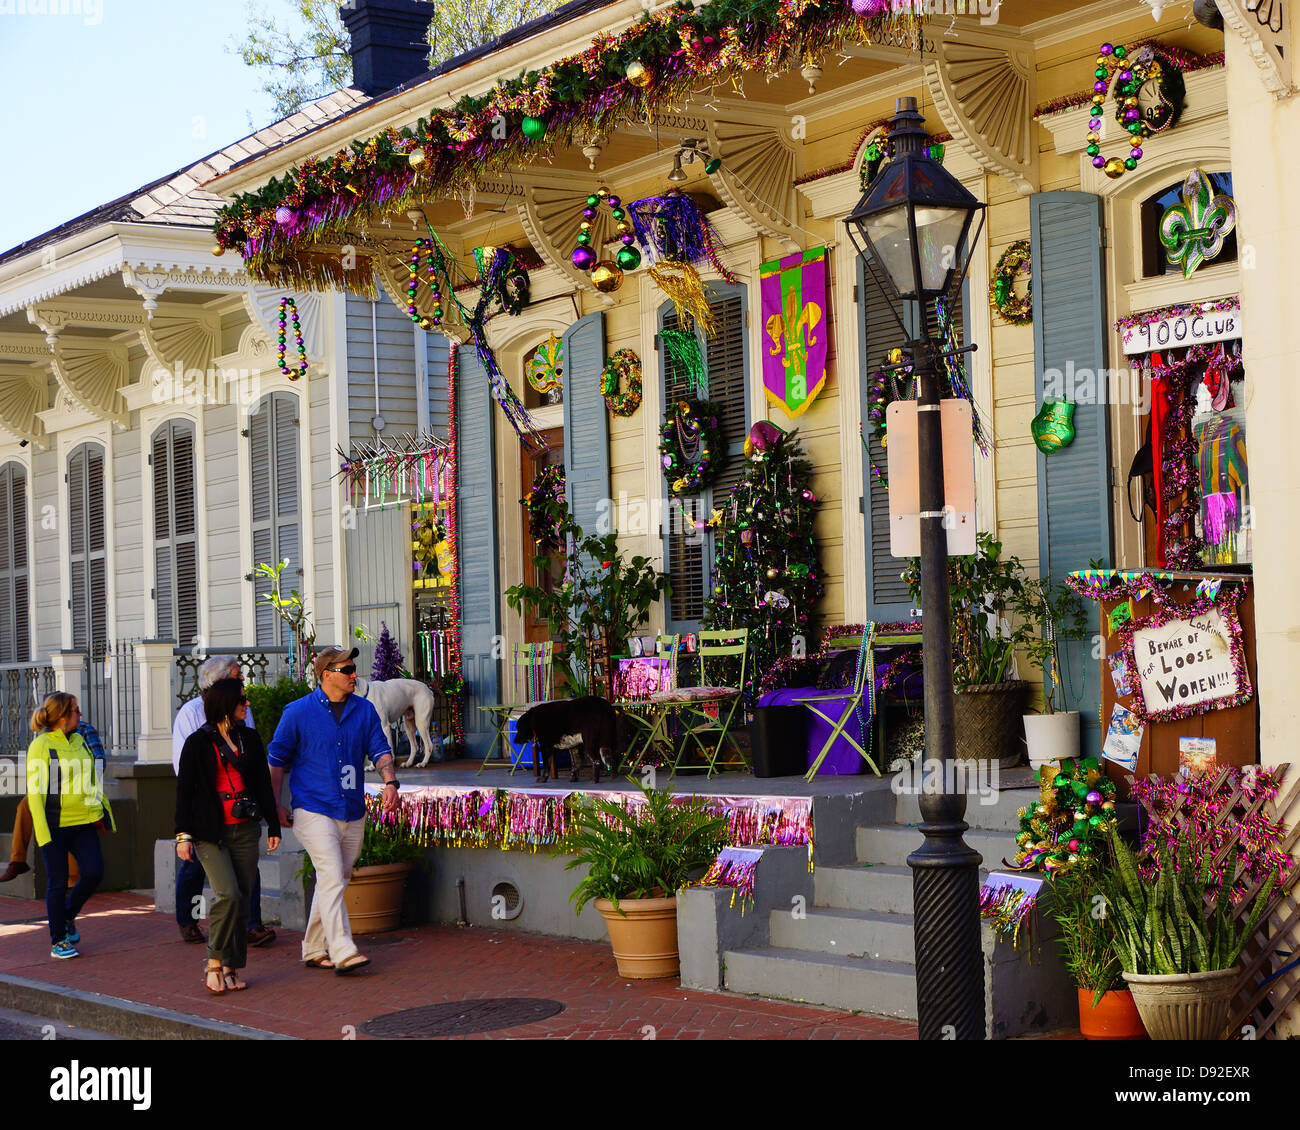 Mardi Gras decorations at table Stock Photo by ©urban_light 65306965